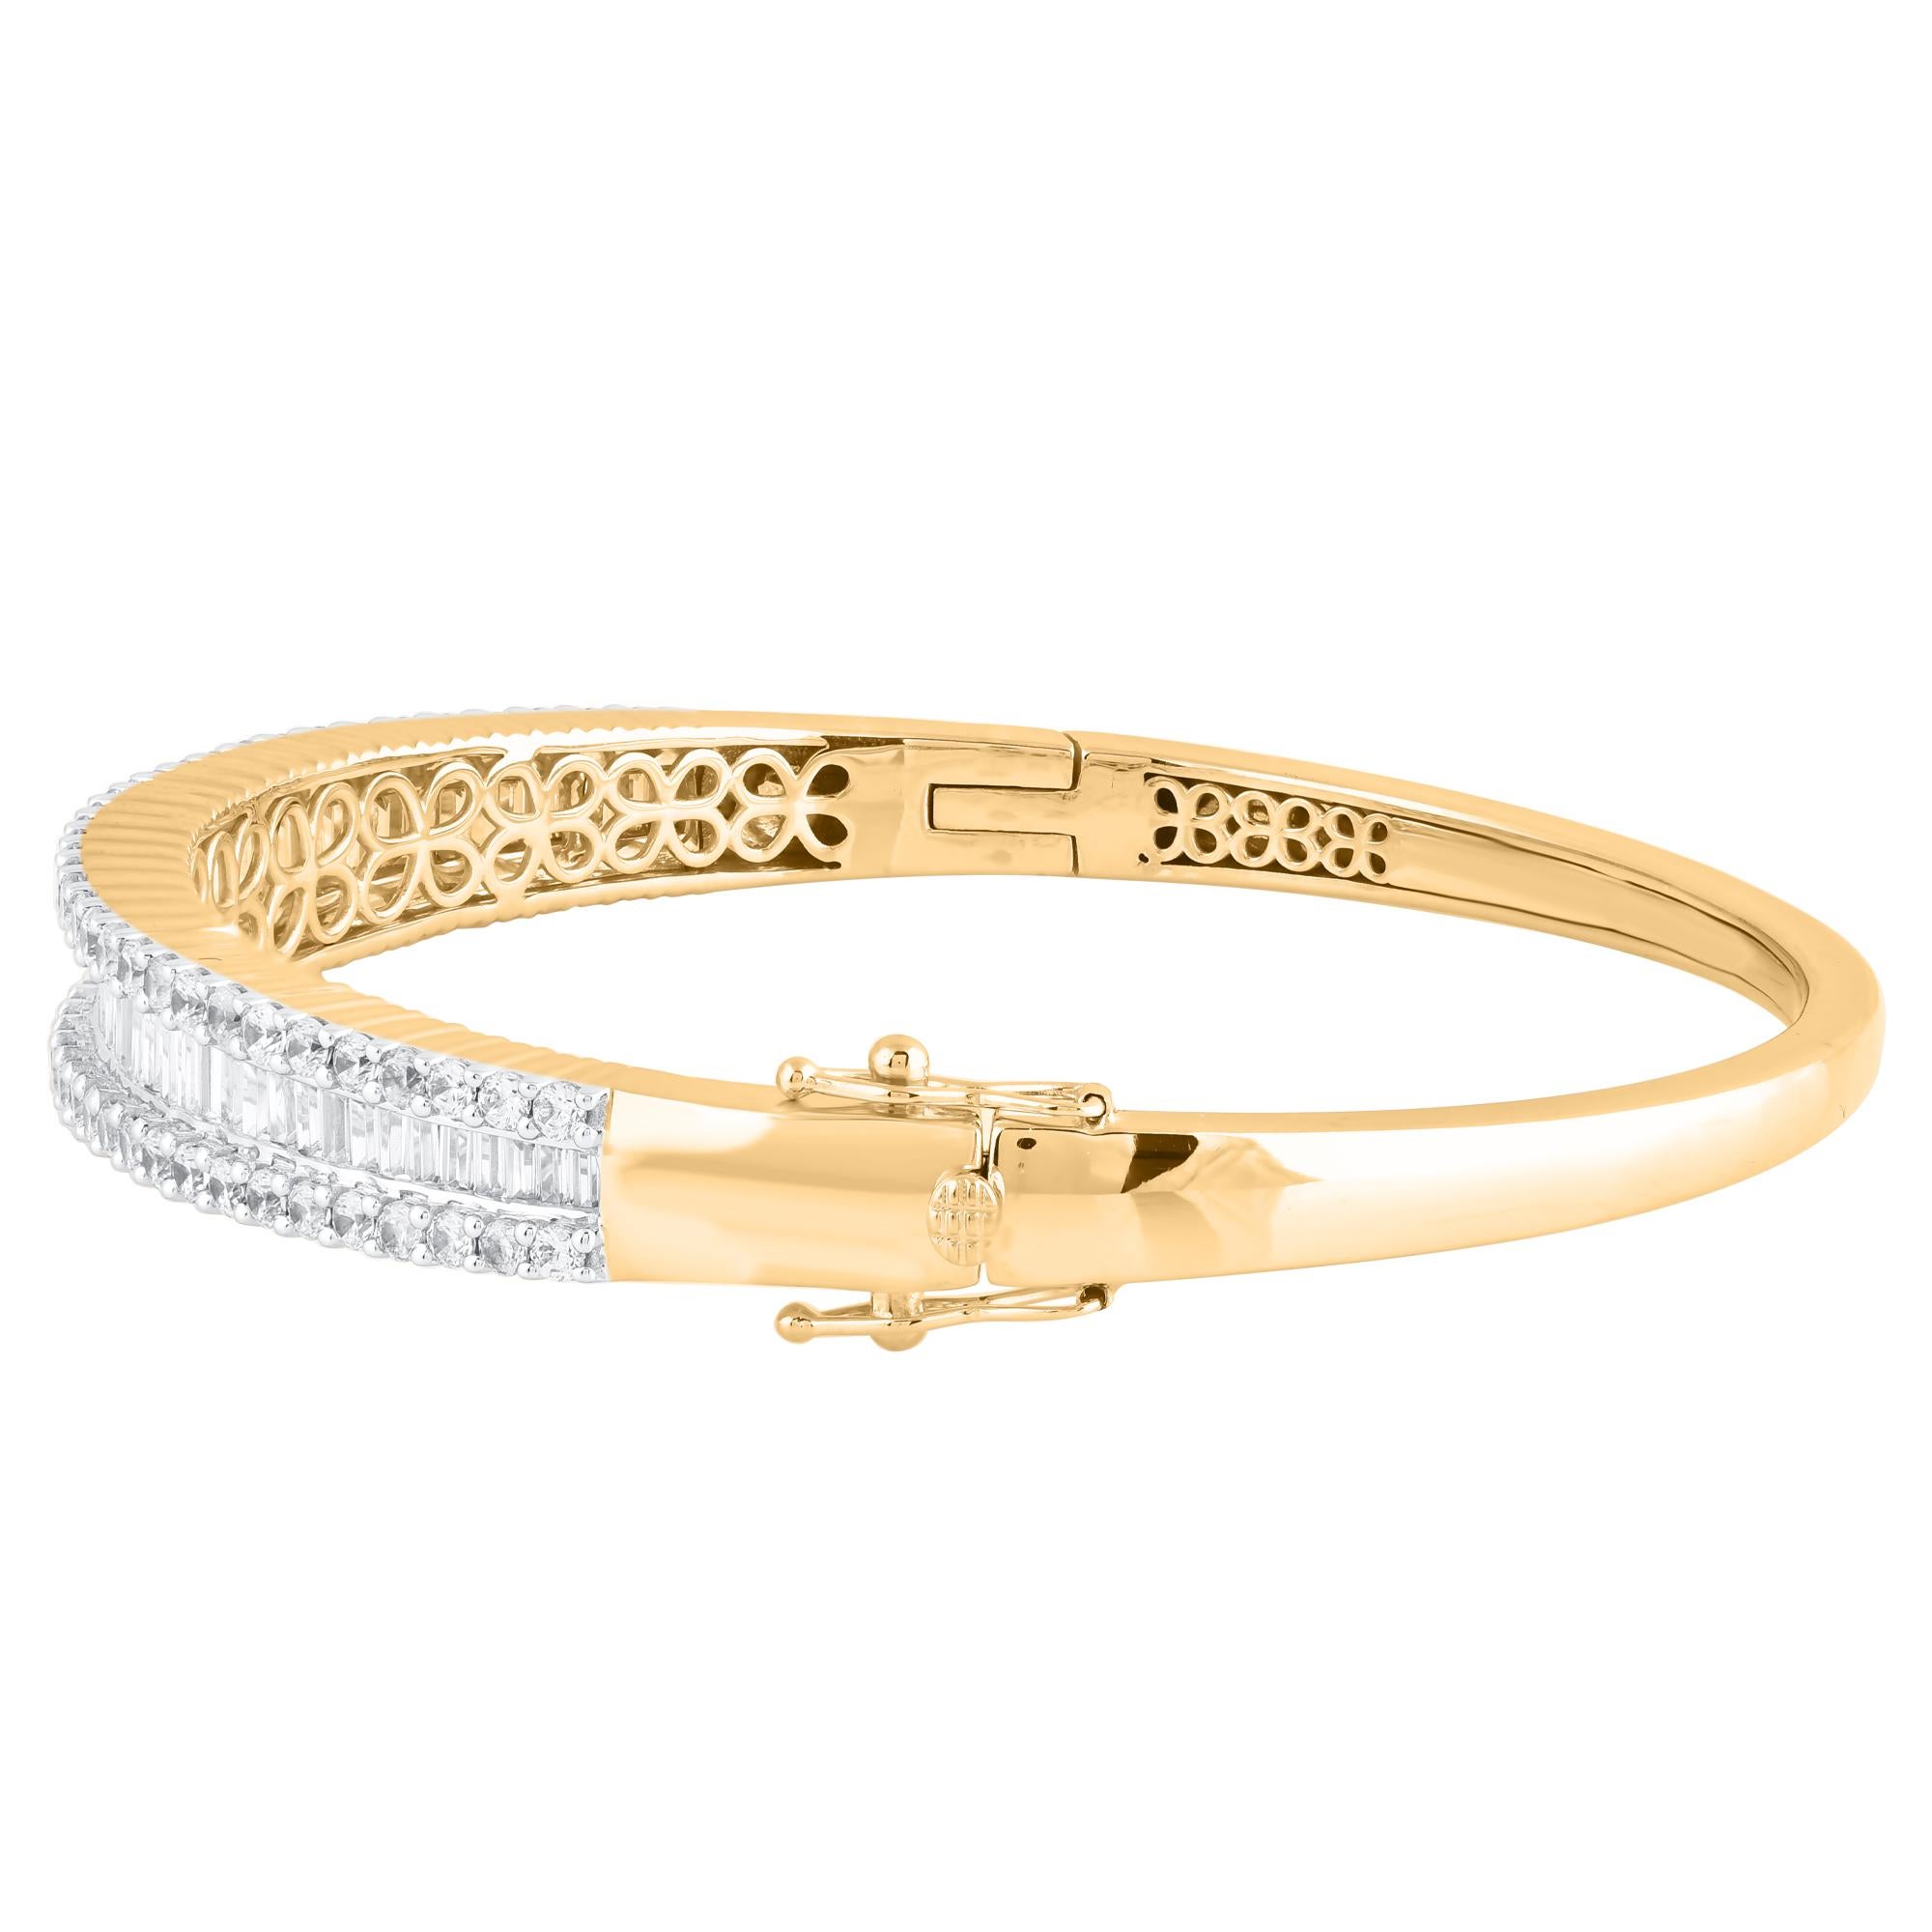 Classic and sophisticated, this diamond bangle bracelet pairs well with any attire. This Shimmering bangle bracelet features 119 natural brilliant cut & baguette diamonds in prong & channel setting and crafted in 14kt yellow gold. Diamonds are